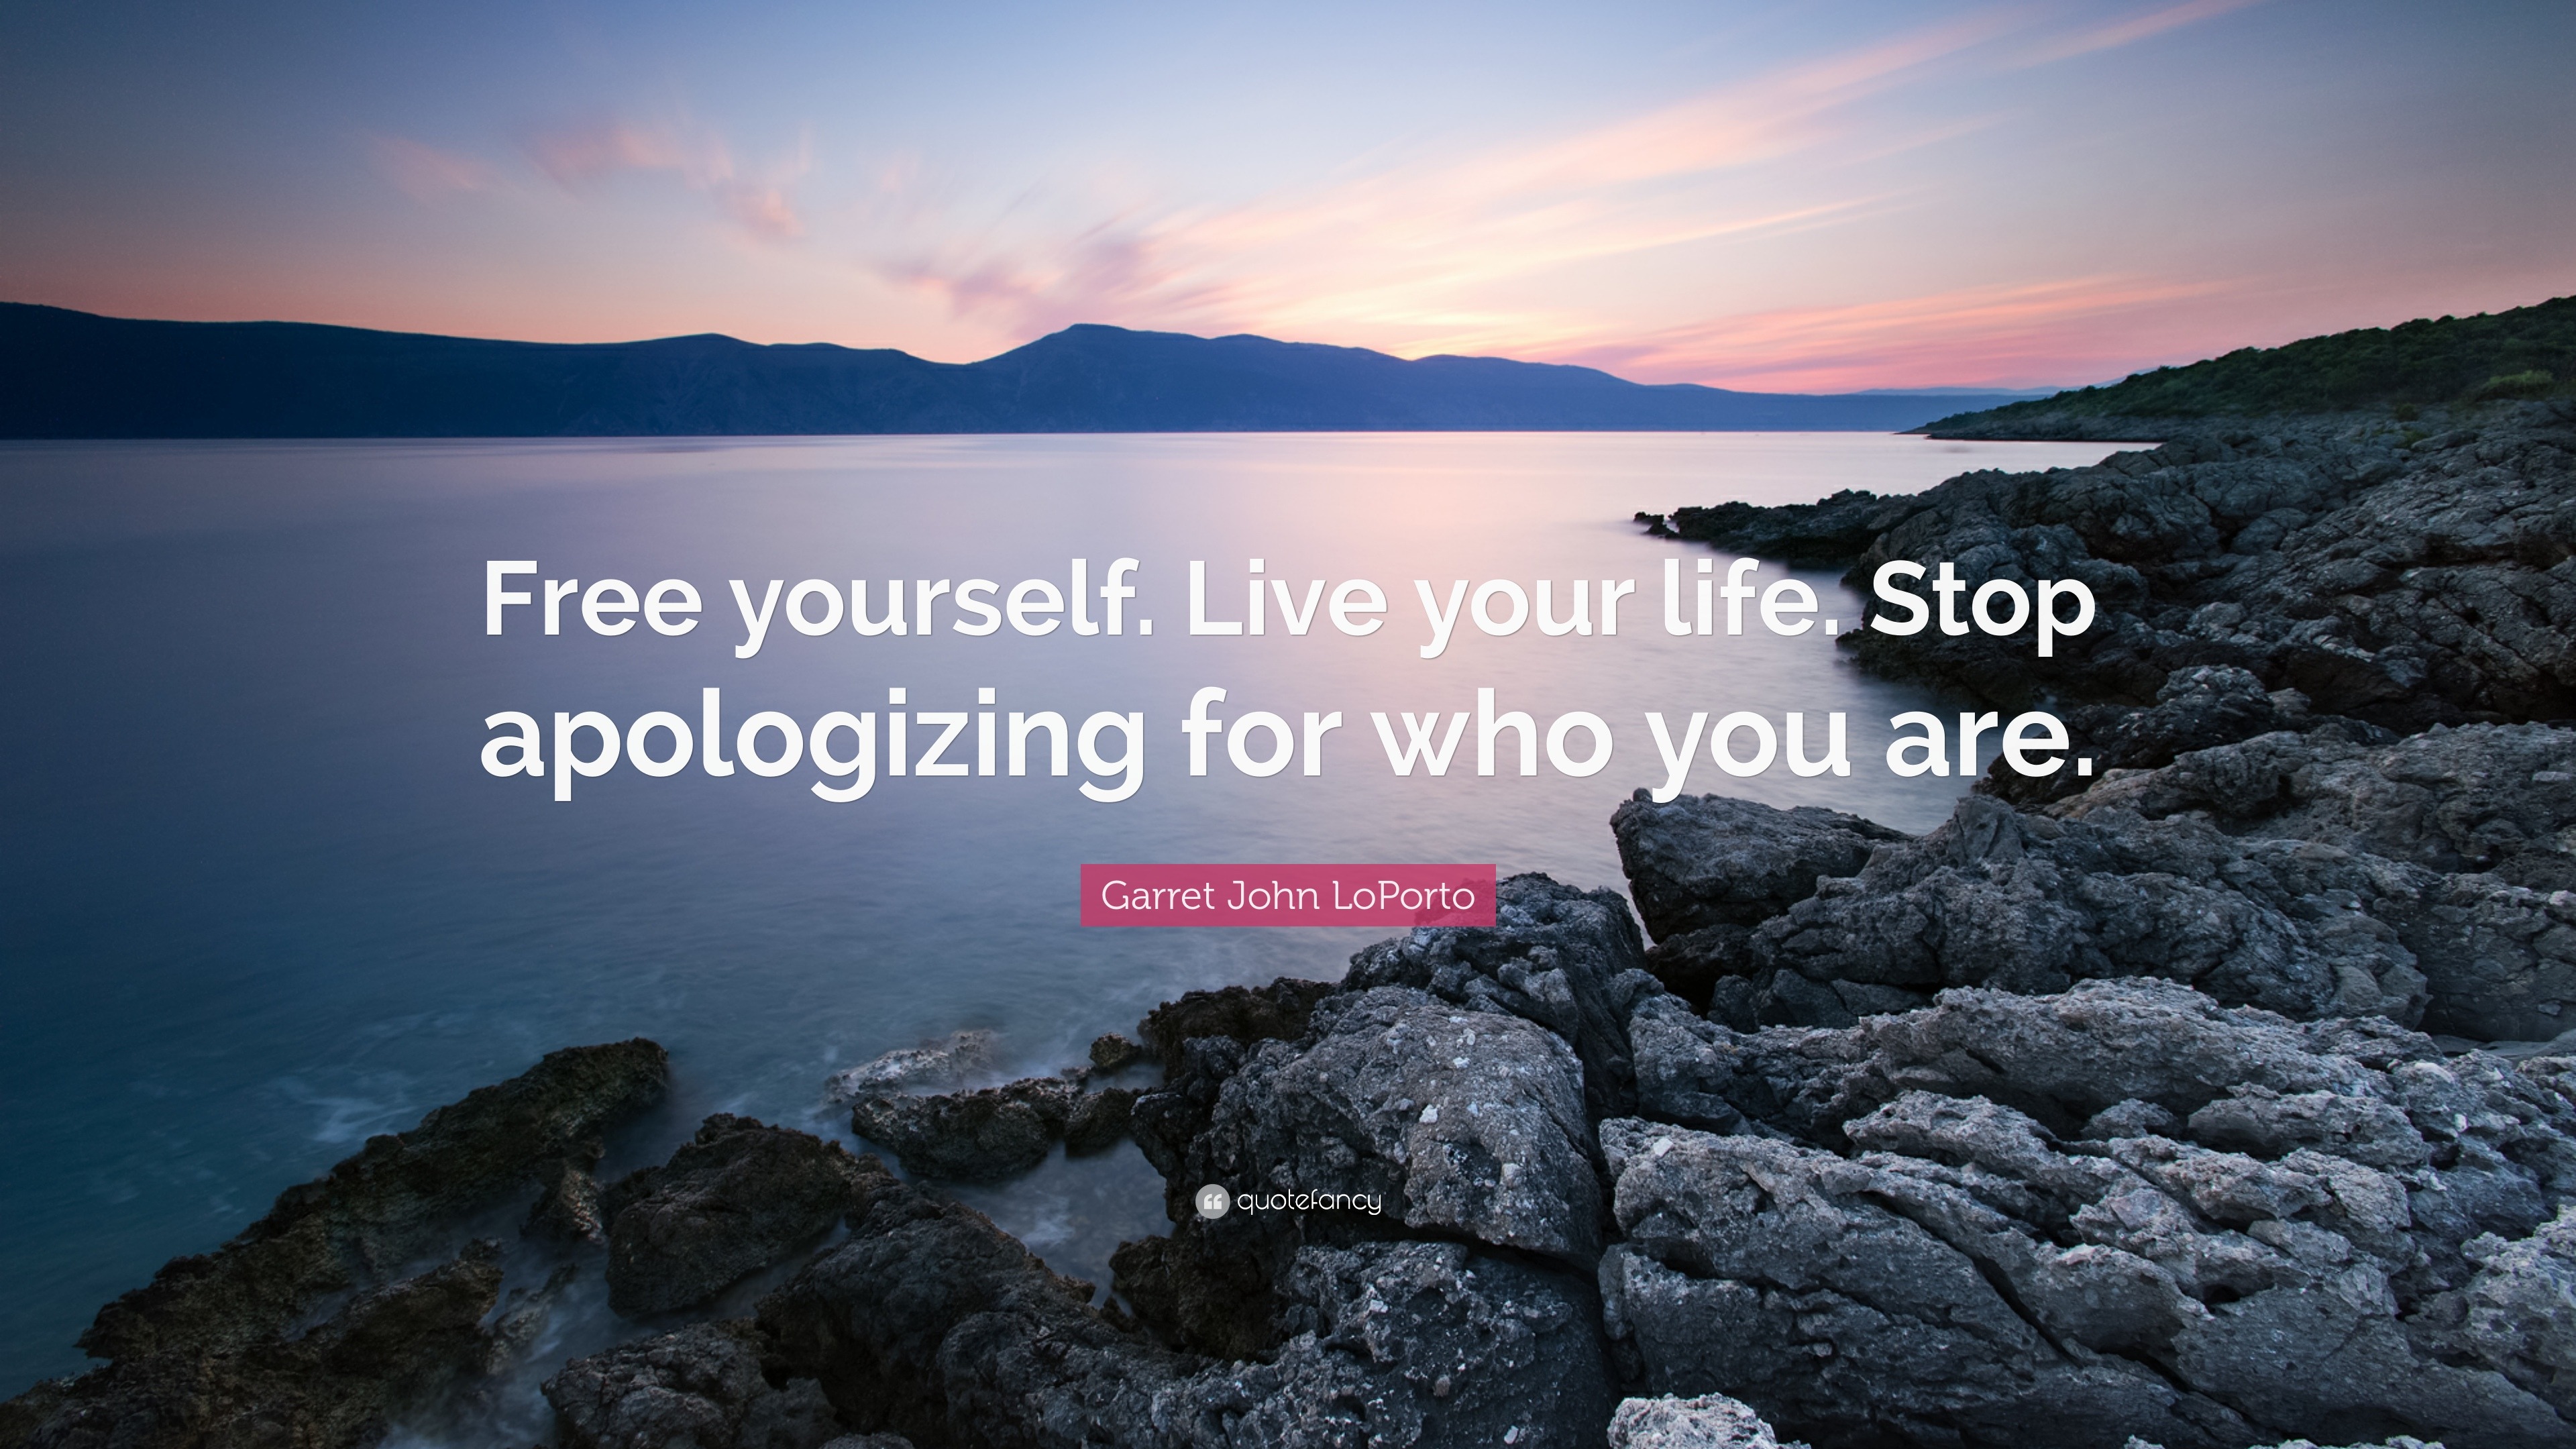 Garret John LoPorto Quote: “Free yourself. Live your life. Stop